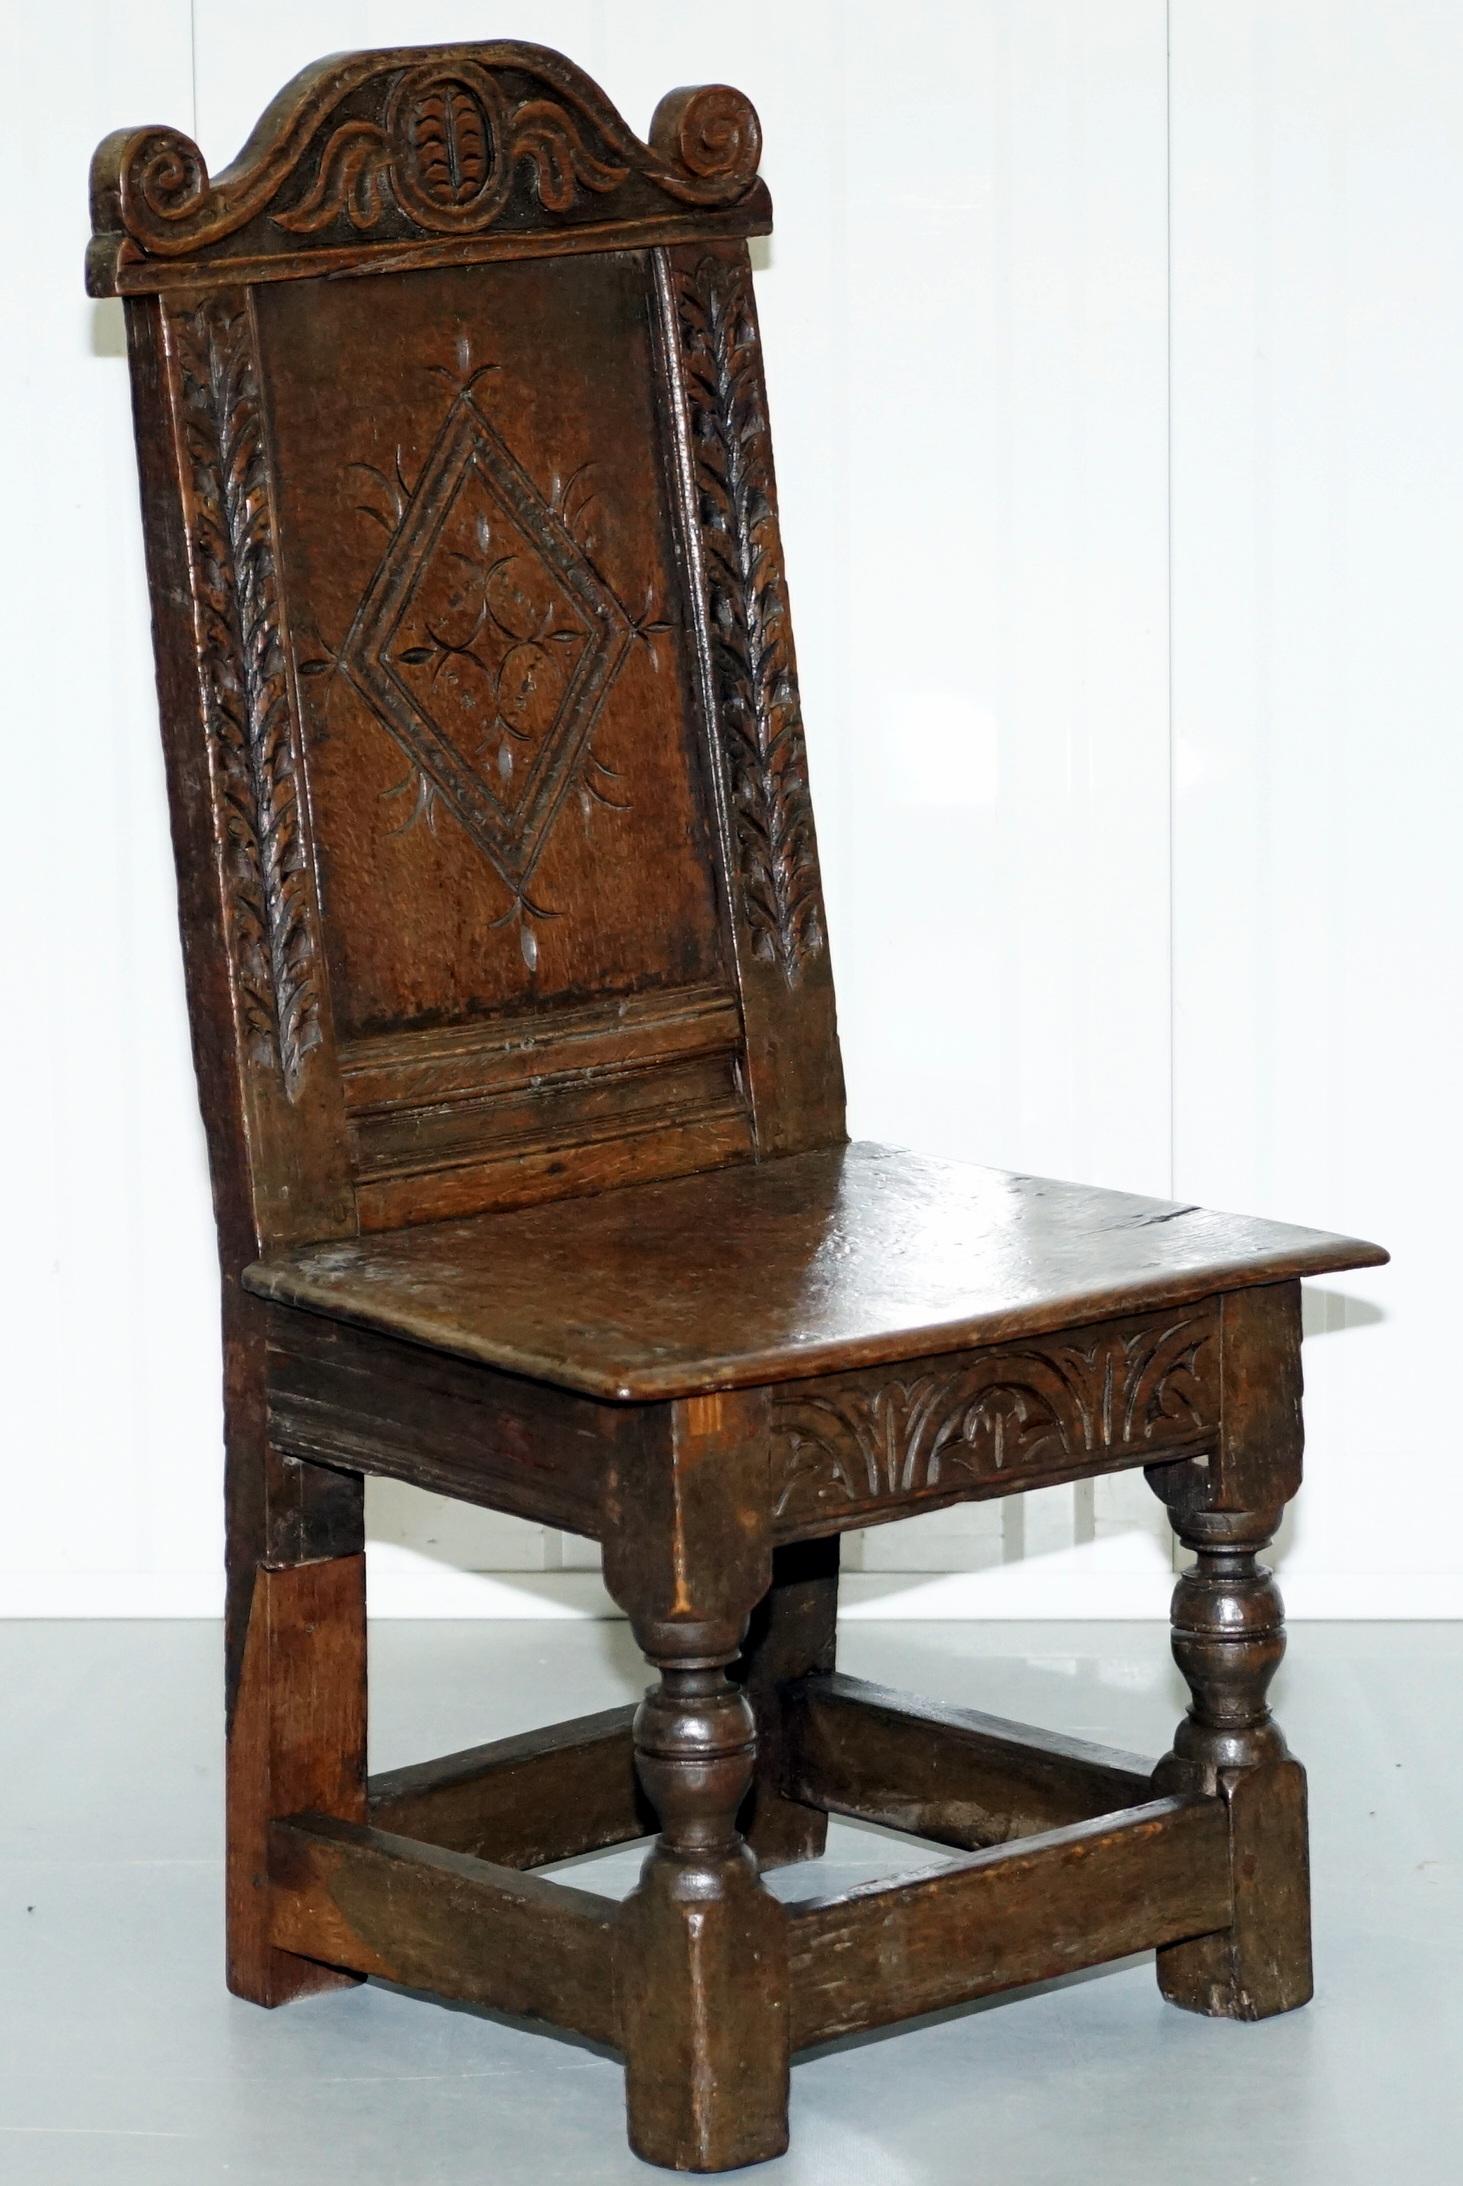 We are delighted to offer for sale this very rare small circa 1760 Fruitwood hand carved side chair

A good looking and well-made piece, the timber patina is to die for, you only get this look and feel from genuine age and ware, just look and the